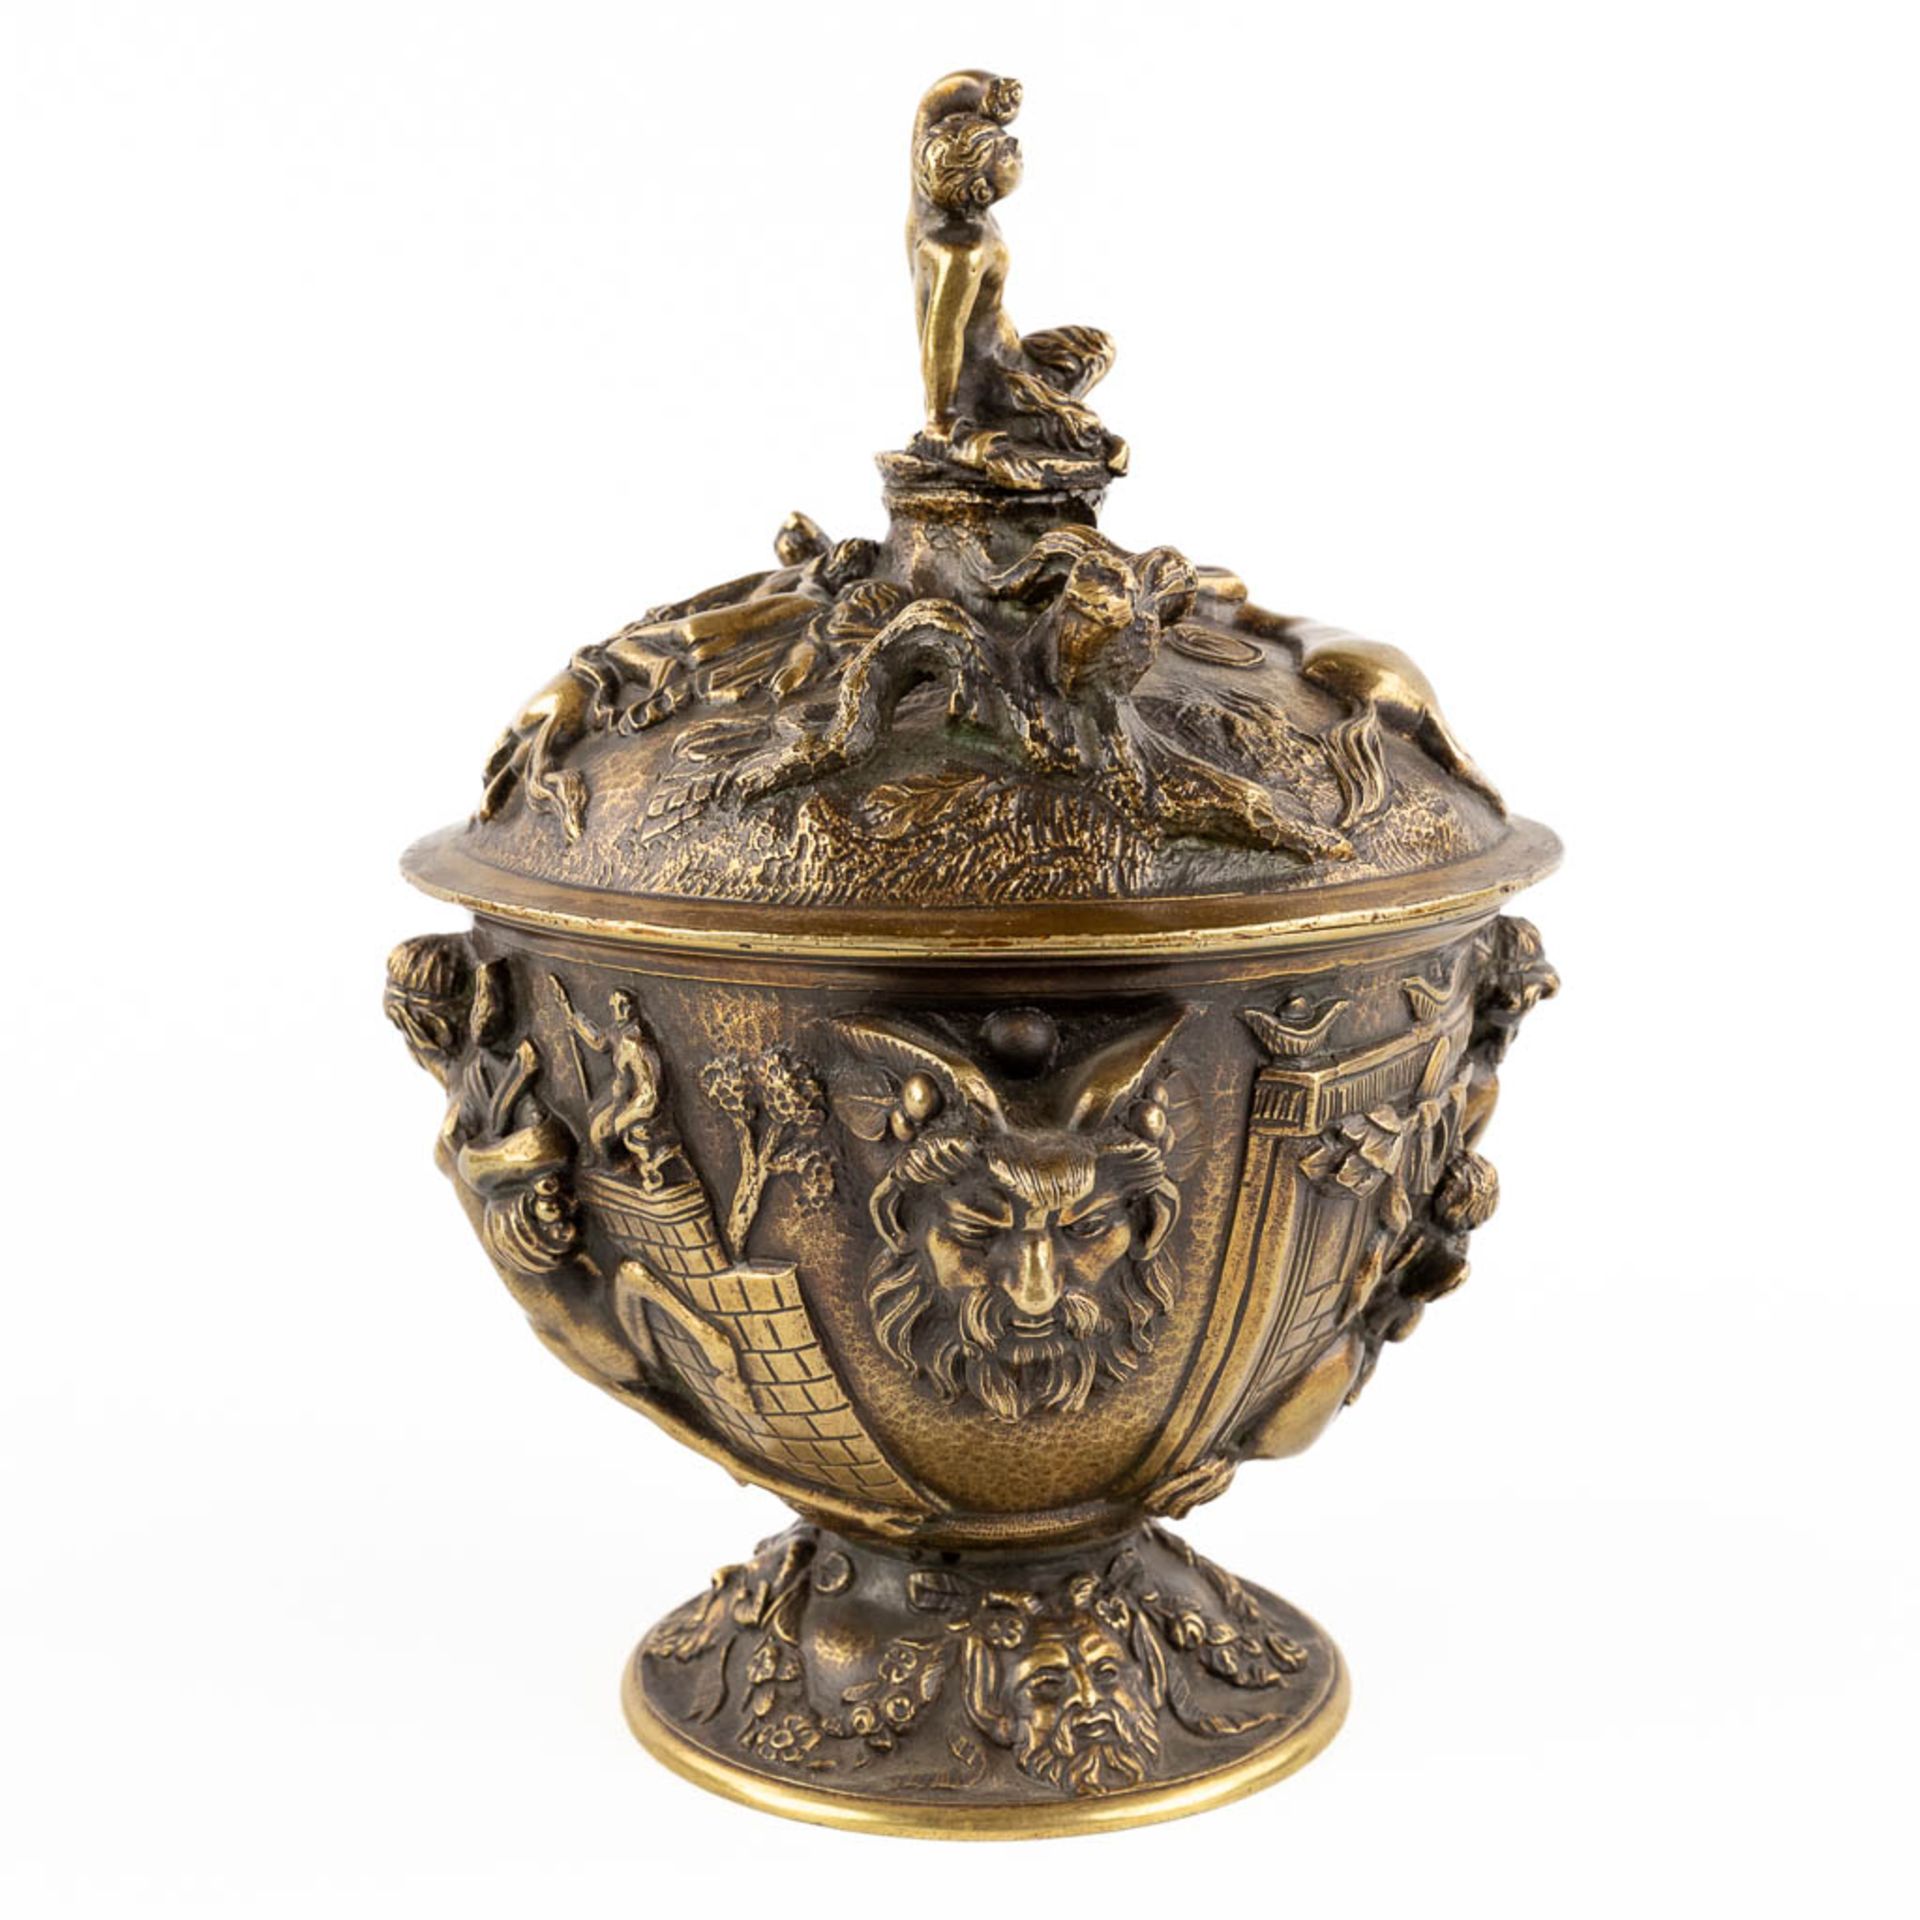 A pot with a lid, decorated with mythological figurines, patinated bronze. (H:23 x D:16 cm) - Image 4 of 16